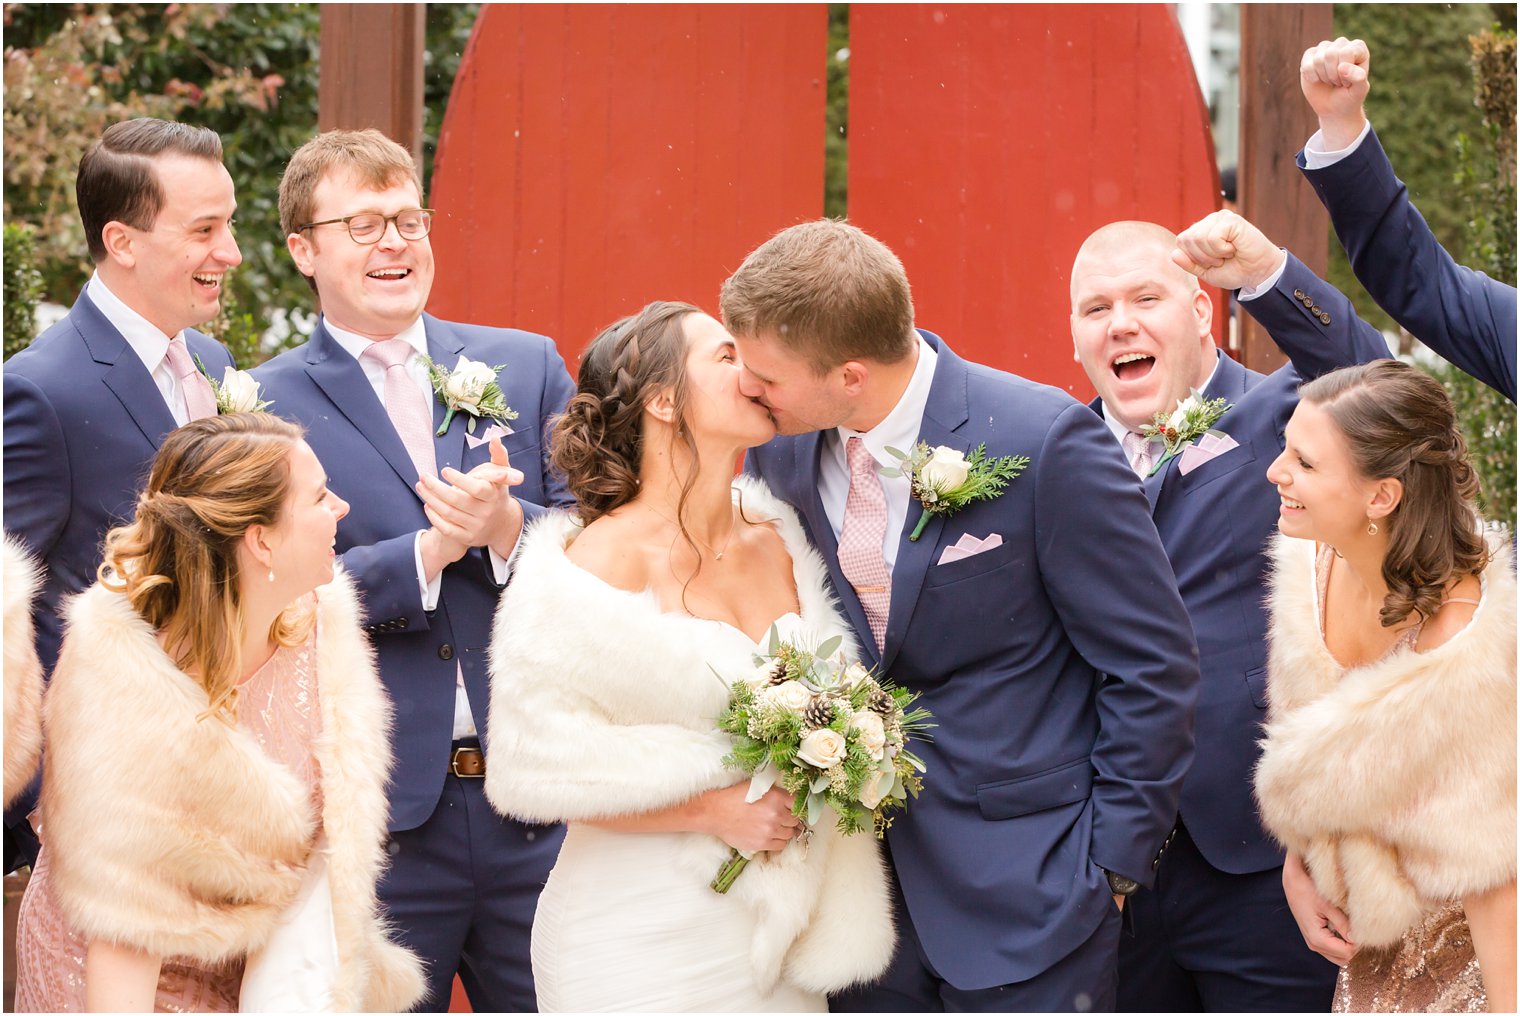 Candid photos of bride, groom, and bridal party | Stone House at Stirling Ridge in Warren, NJ